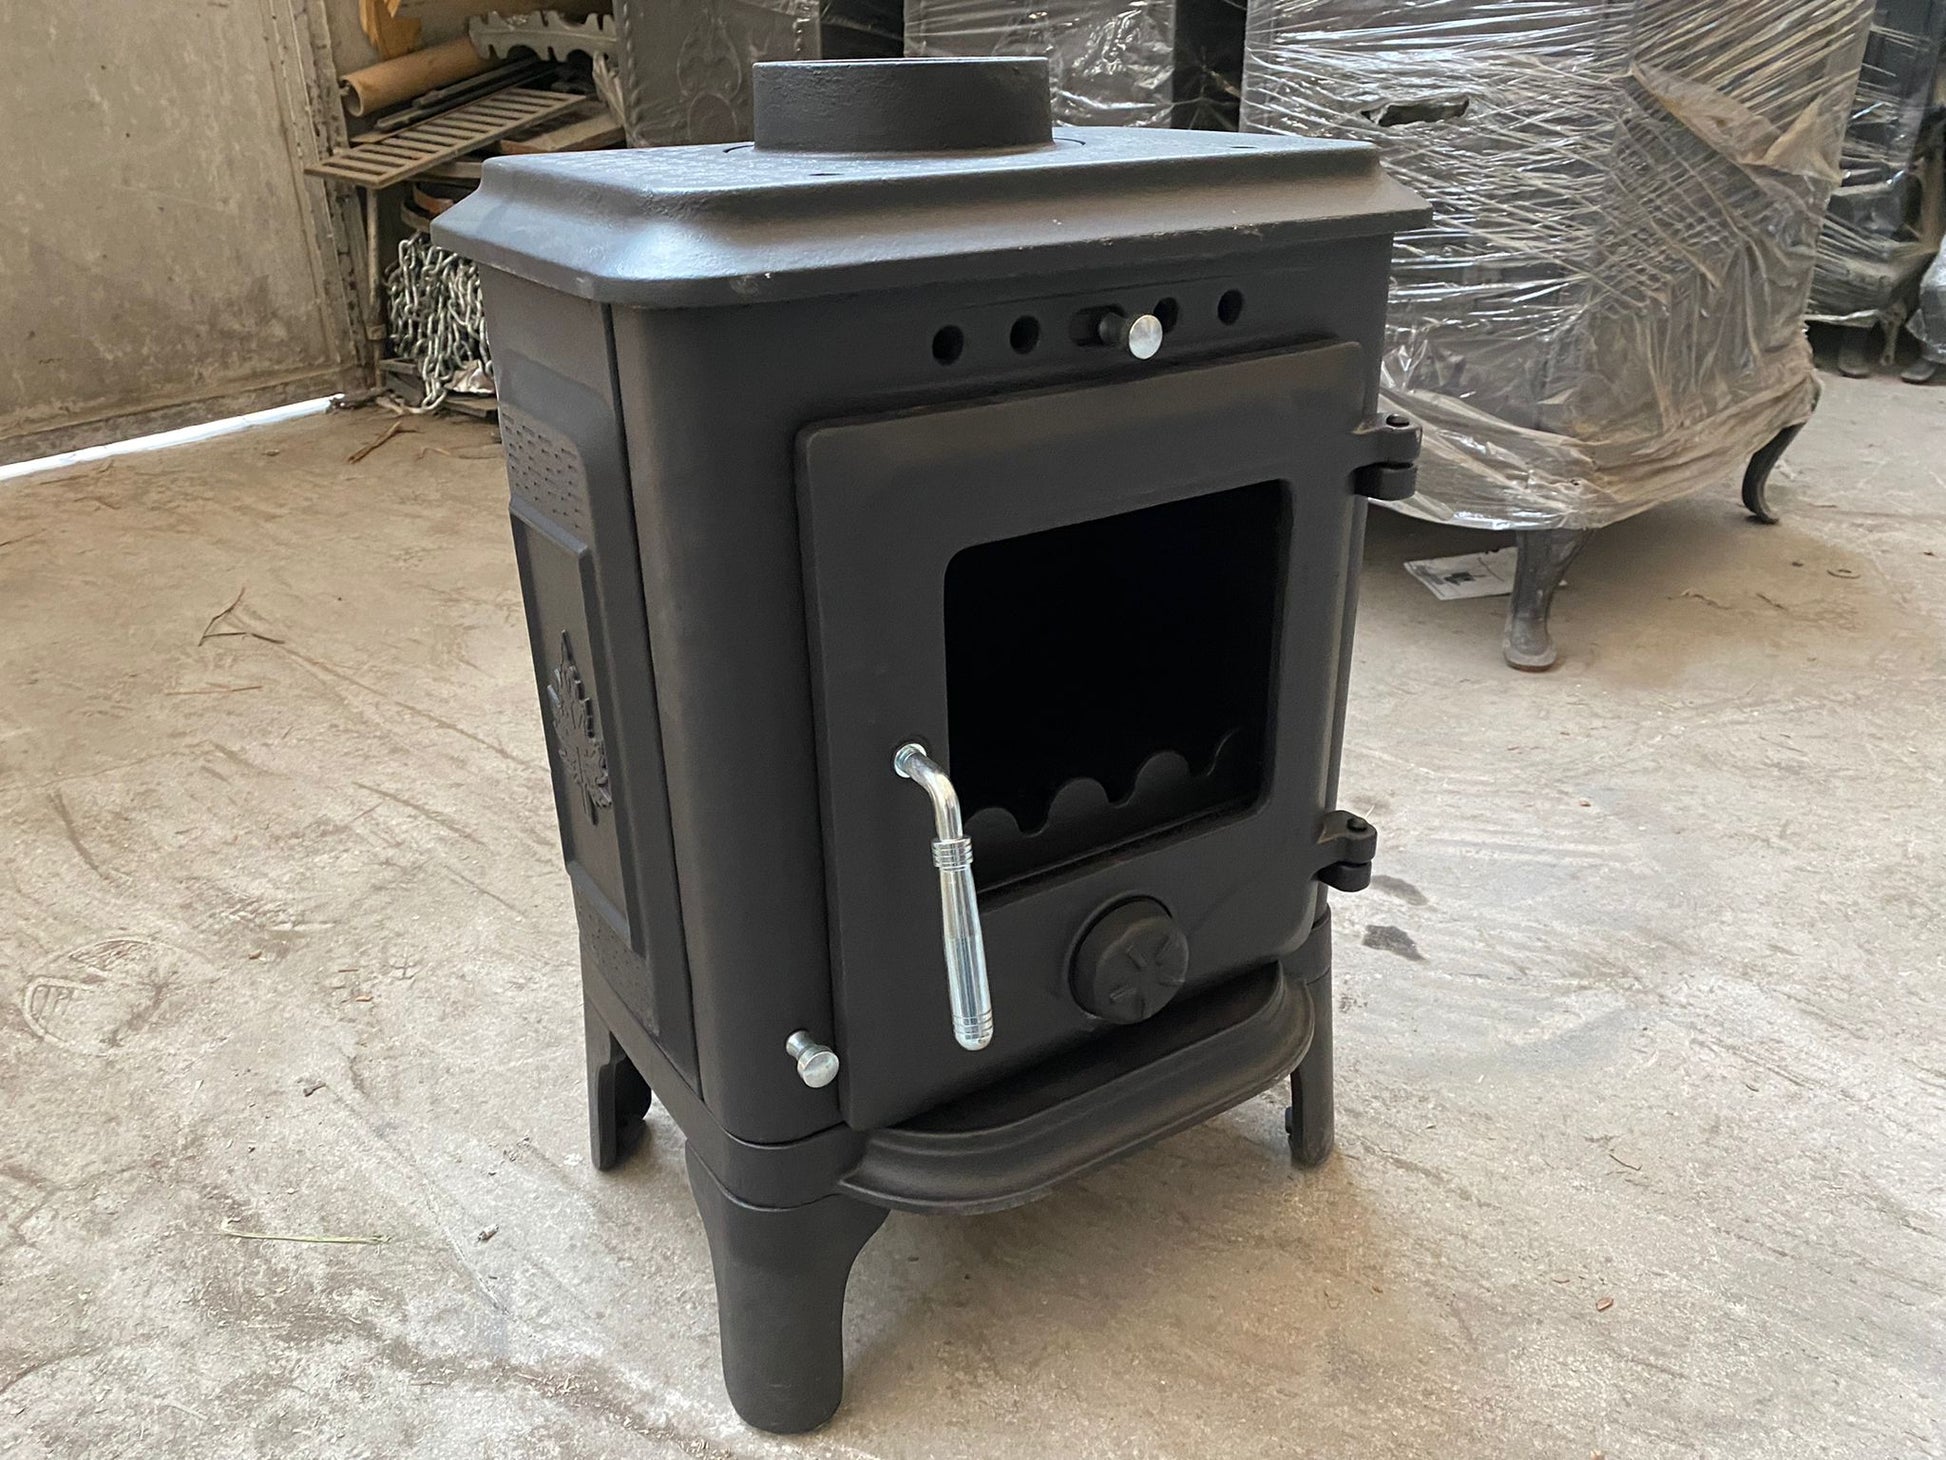 Small Cast Iron Stove for Outdoor Camping | Outdoor Stove | Mini Camping  Stove | Cast Iron Fireplace | Brick Lined Fireplace | Tiny House Stove  Cabin